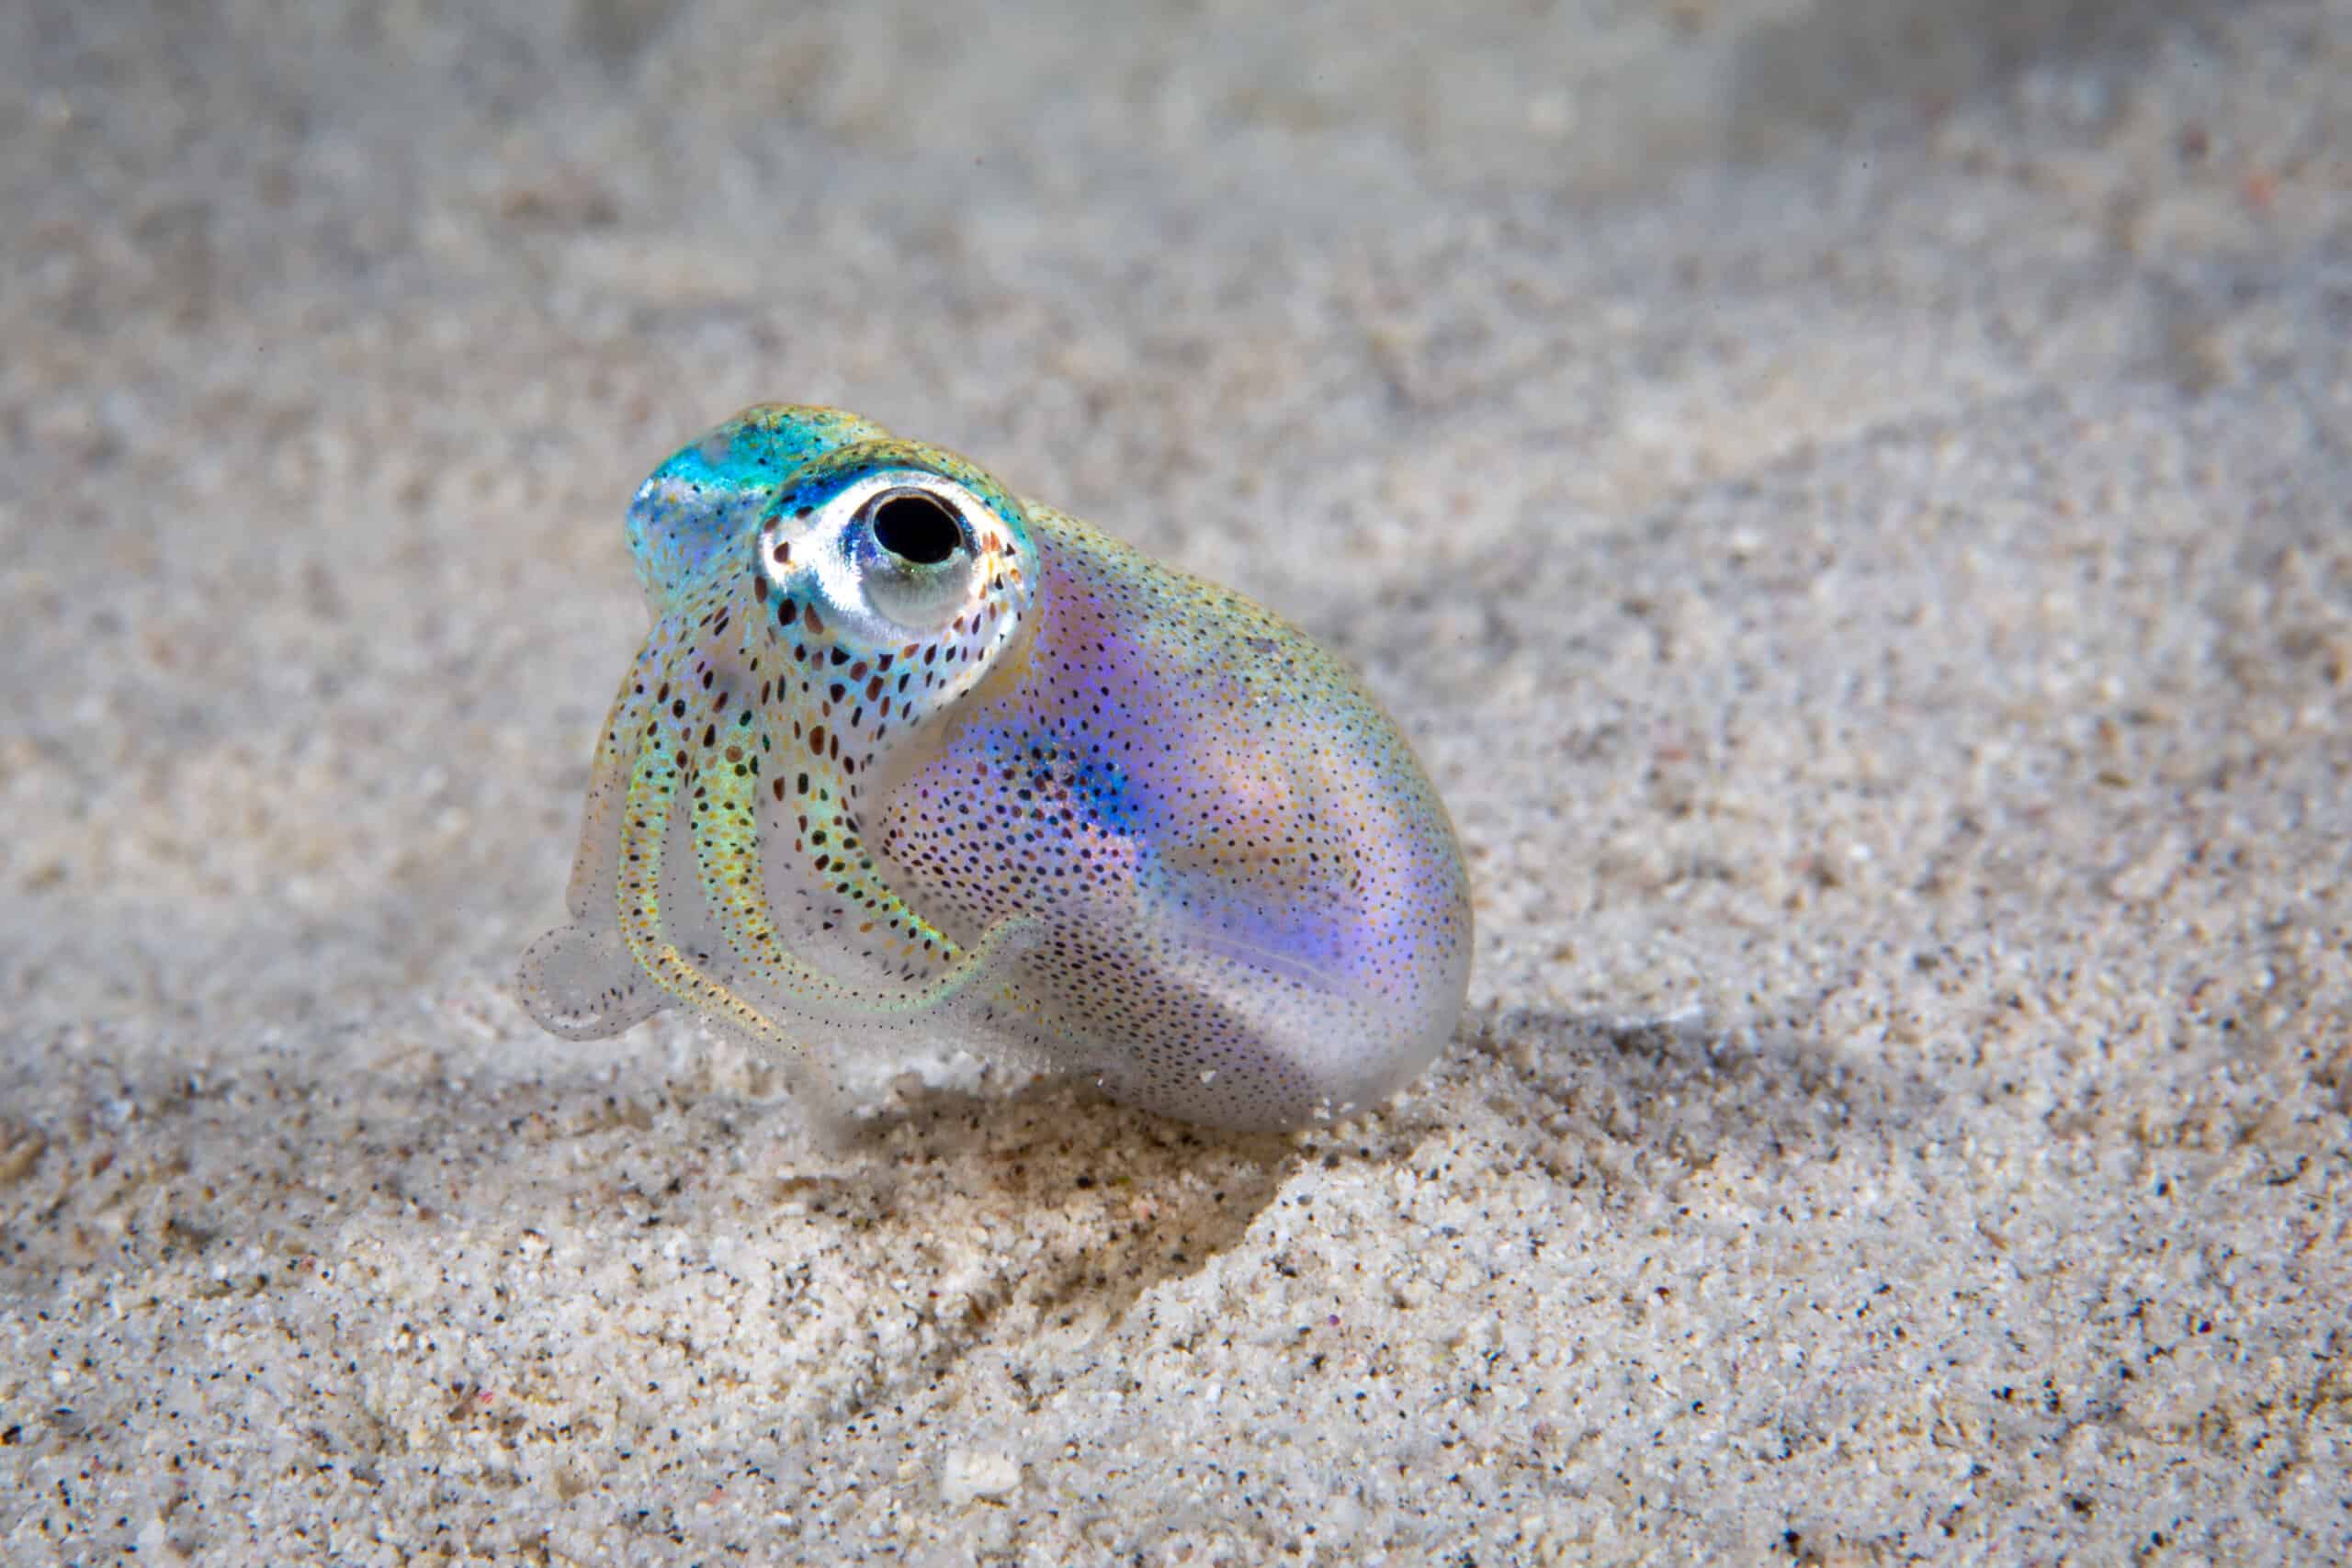 Hawaiian bobtail squid are tiny - only about 1 or 2 inches long